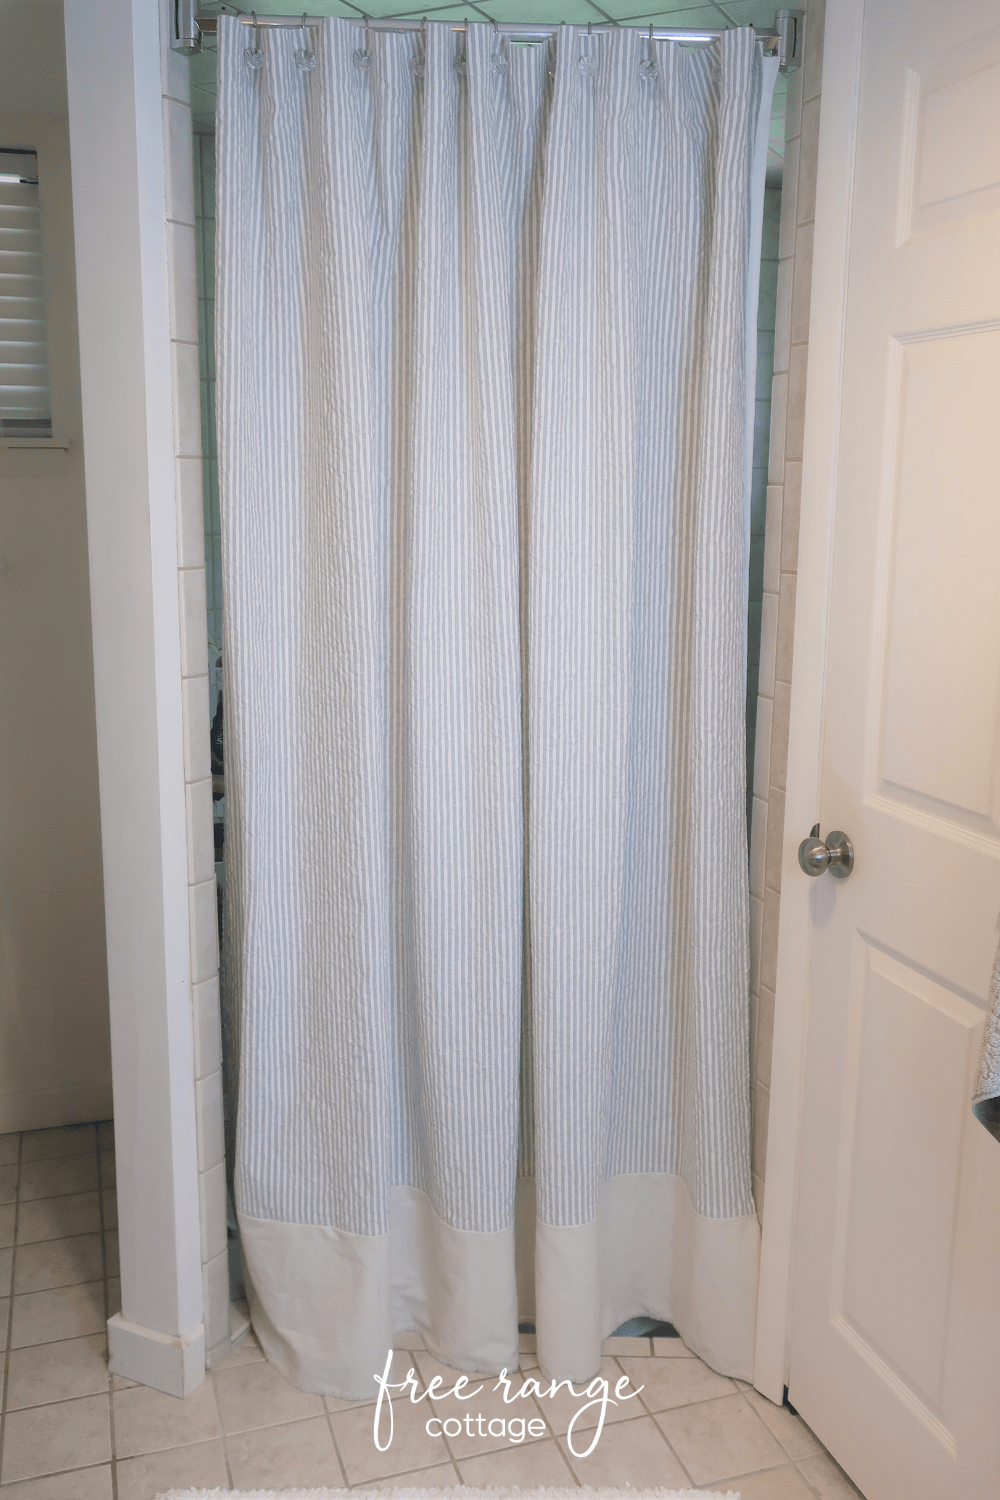 To Lengthen A Curtain With Drop Cloth, Drop Cloth Shower Curtain